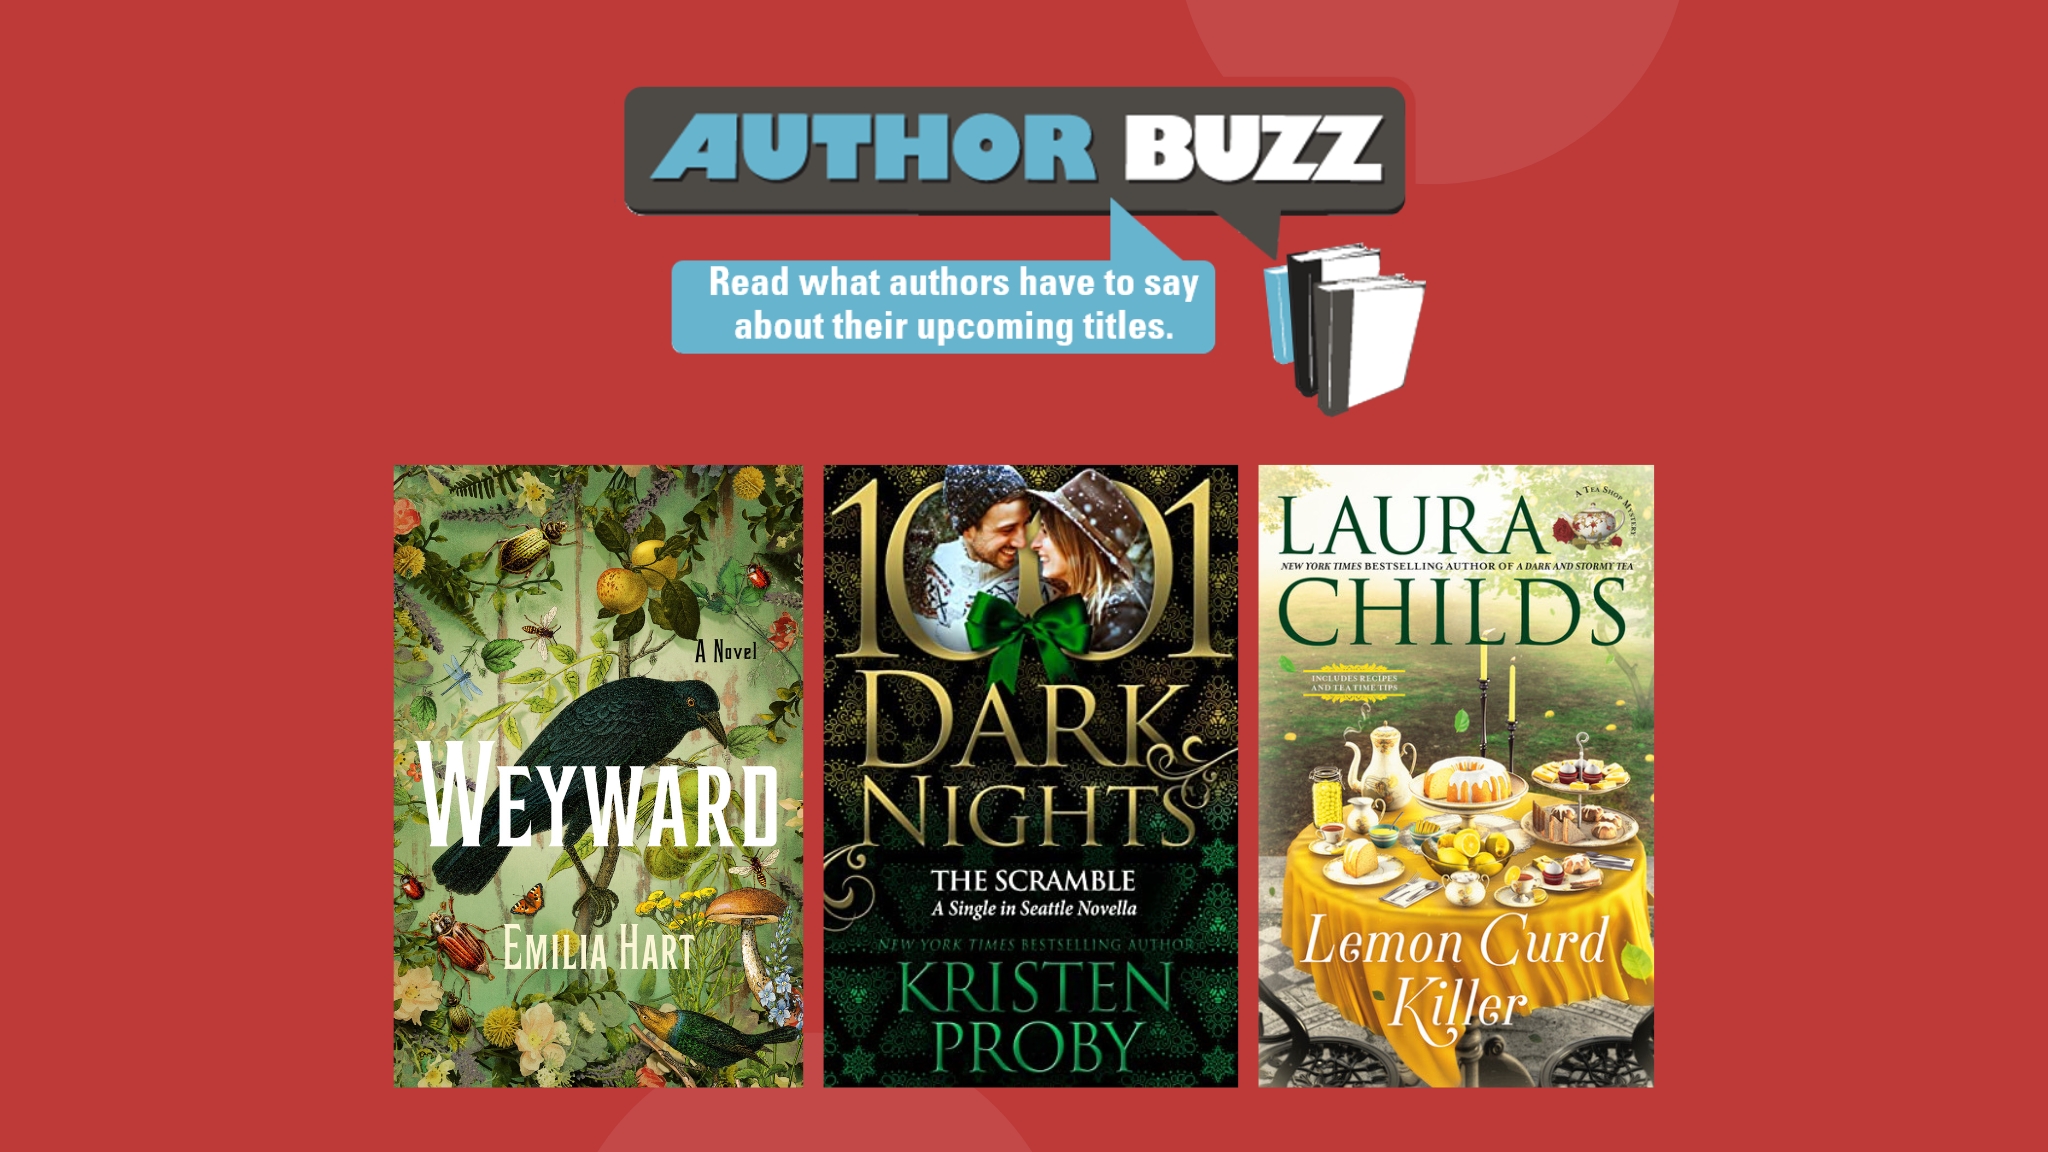 AuthorBuzz: Holiday Romance, Cozy Mystery and Giveaway for Witchy Historical